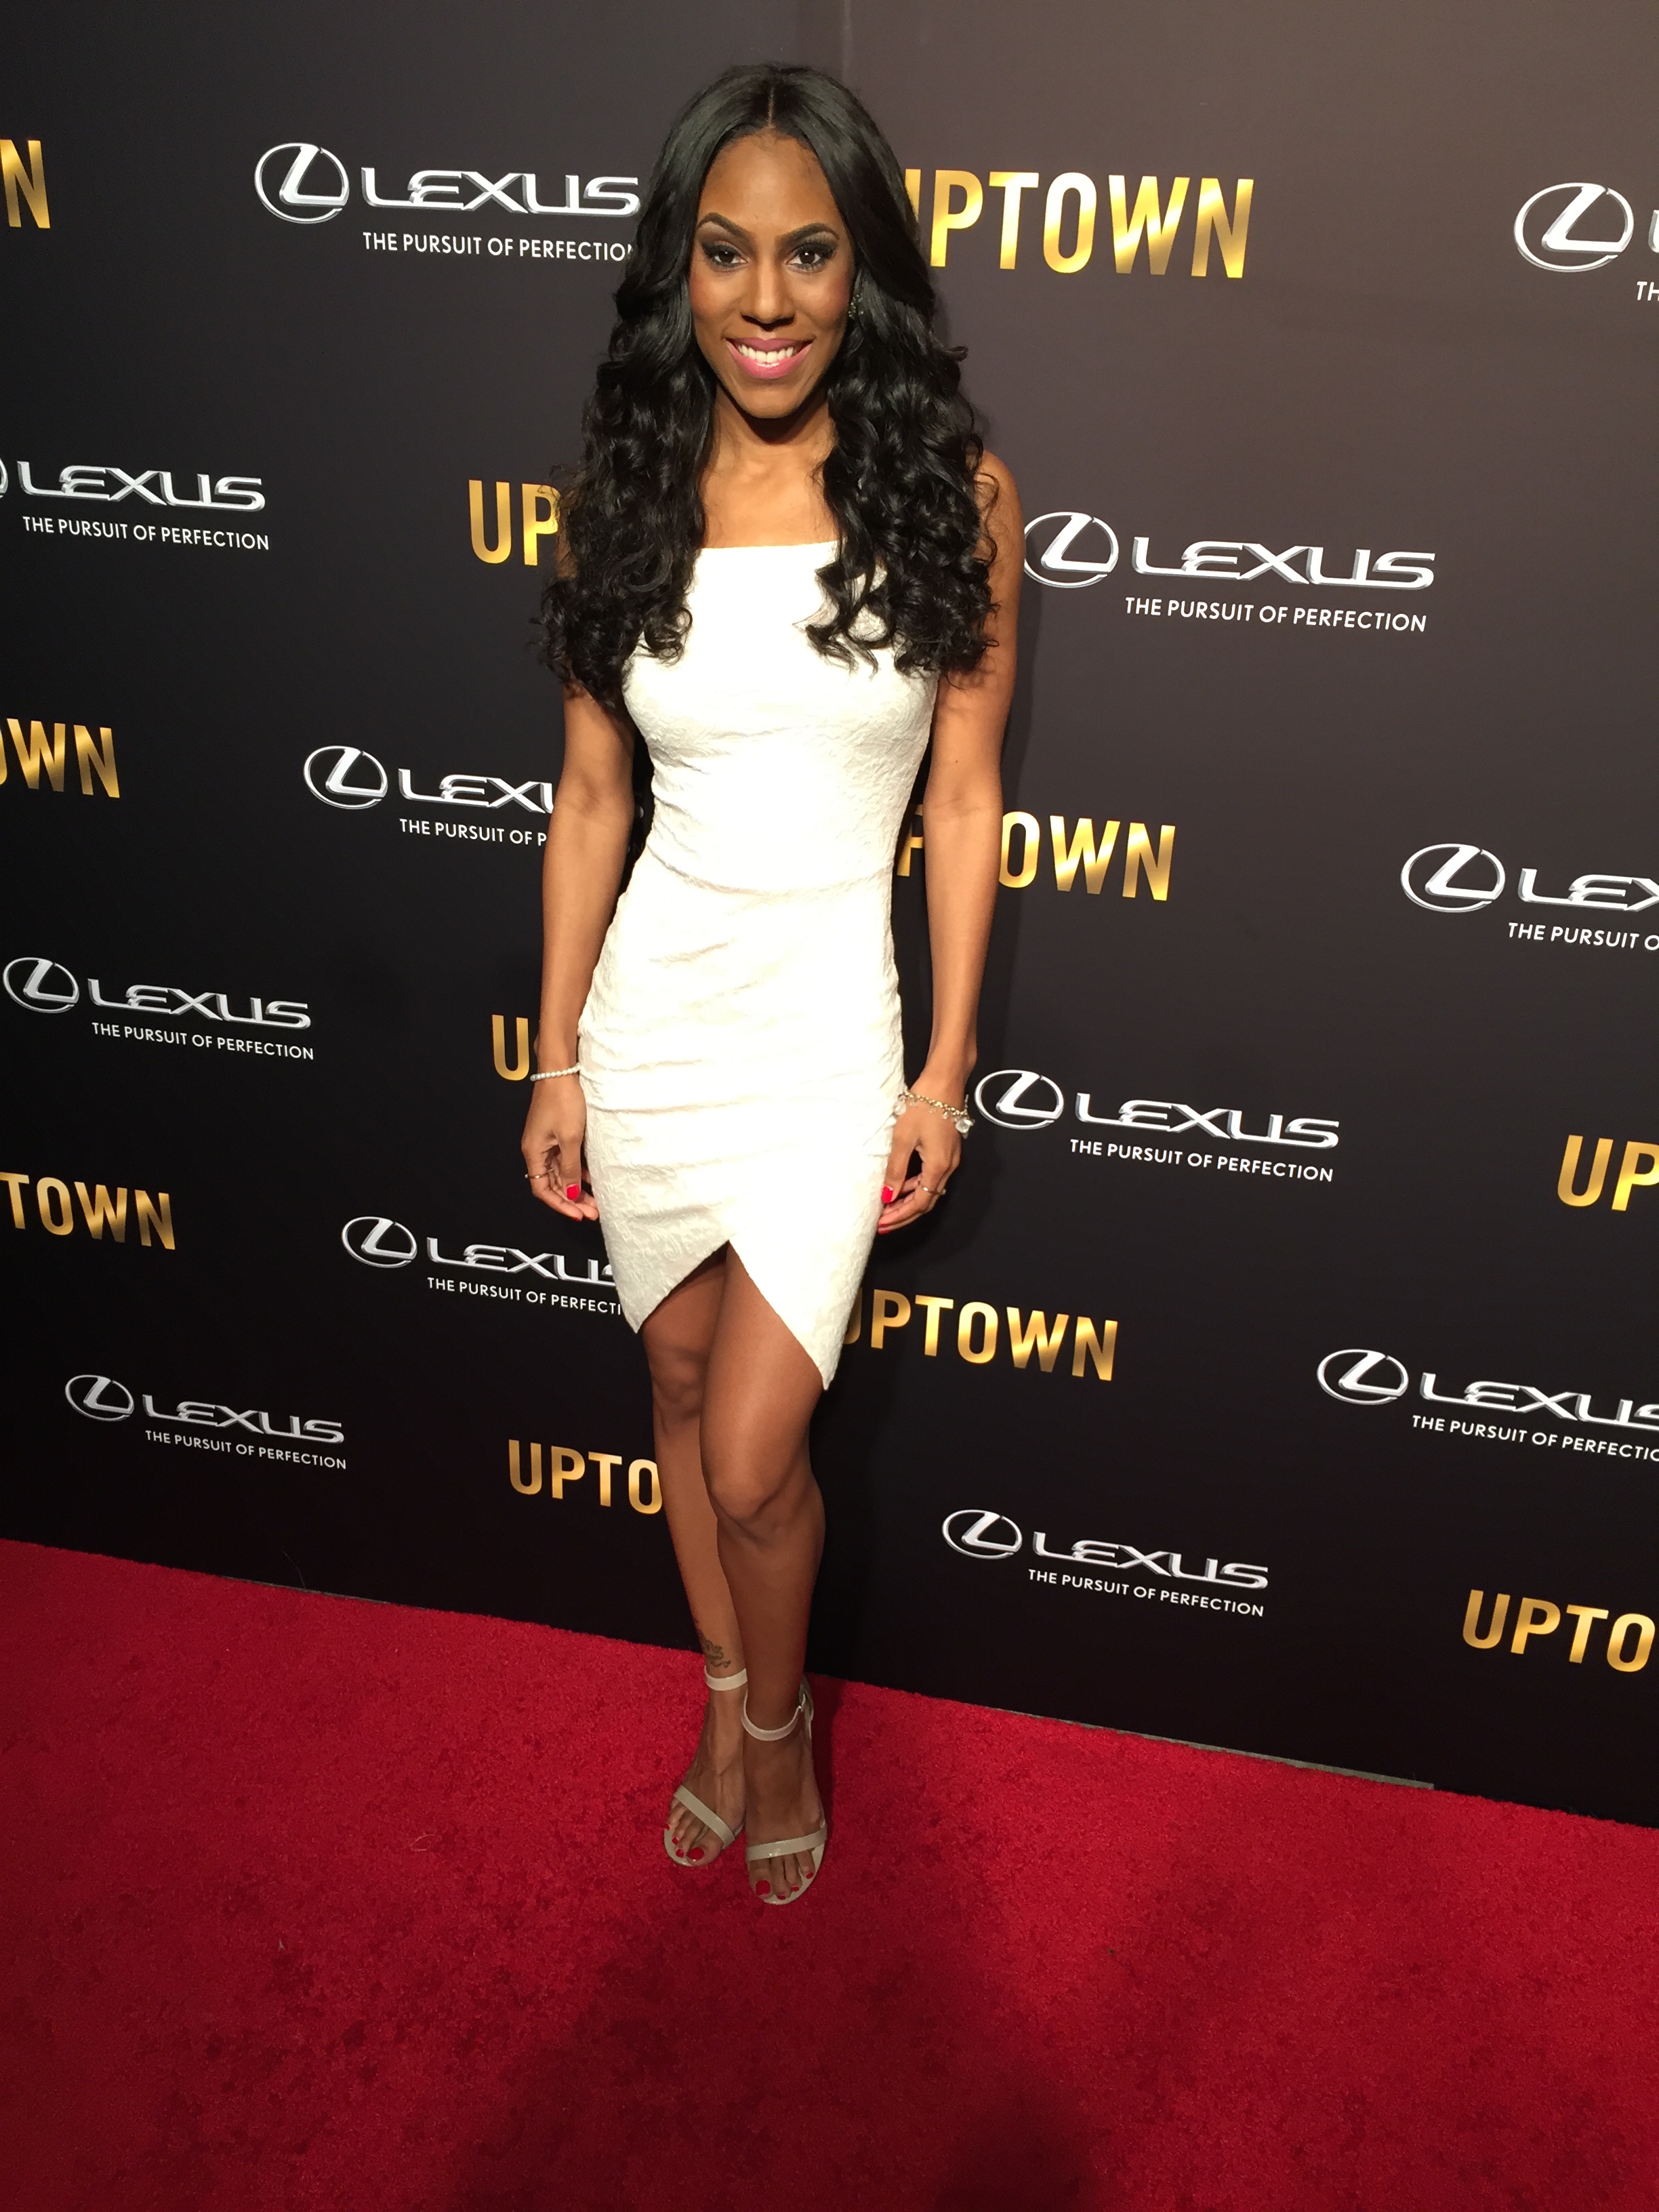 Brittney Q. Hill on the Red Carpet at the Uptown Magazine/Lexus Pre-Oscar Gala honoring Lee Daniels.